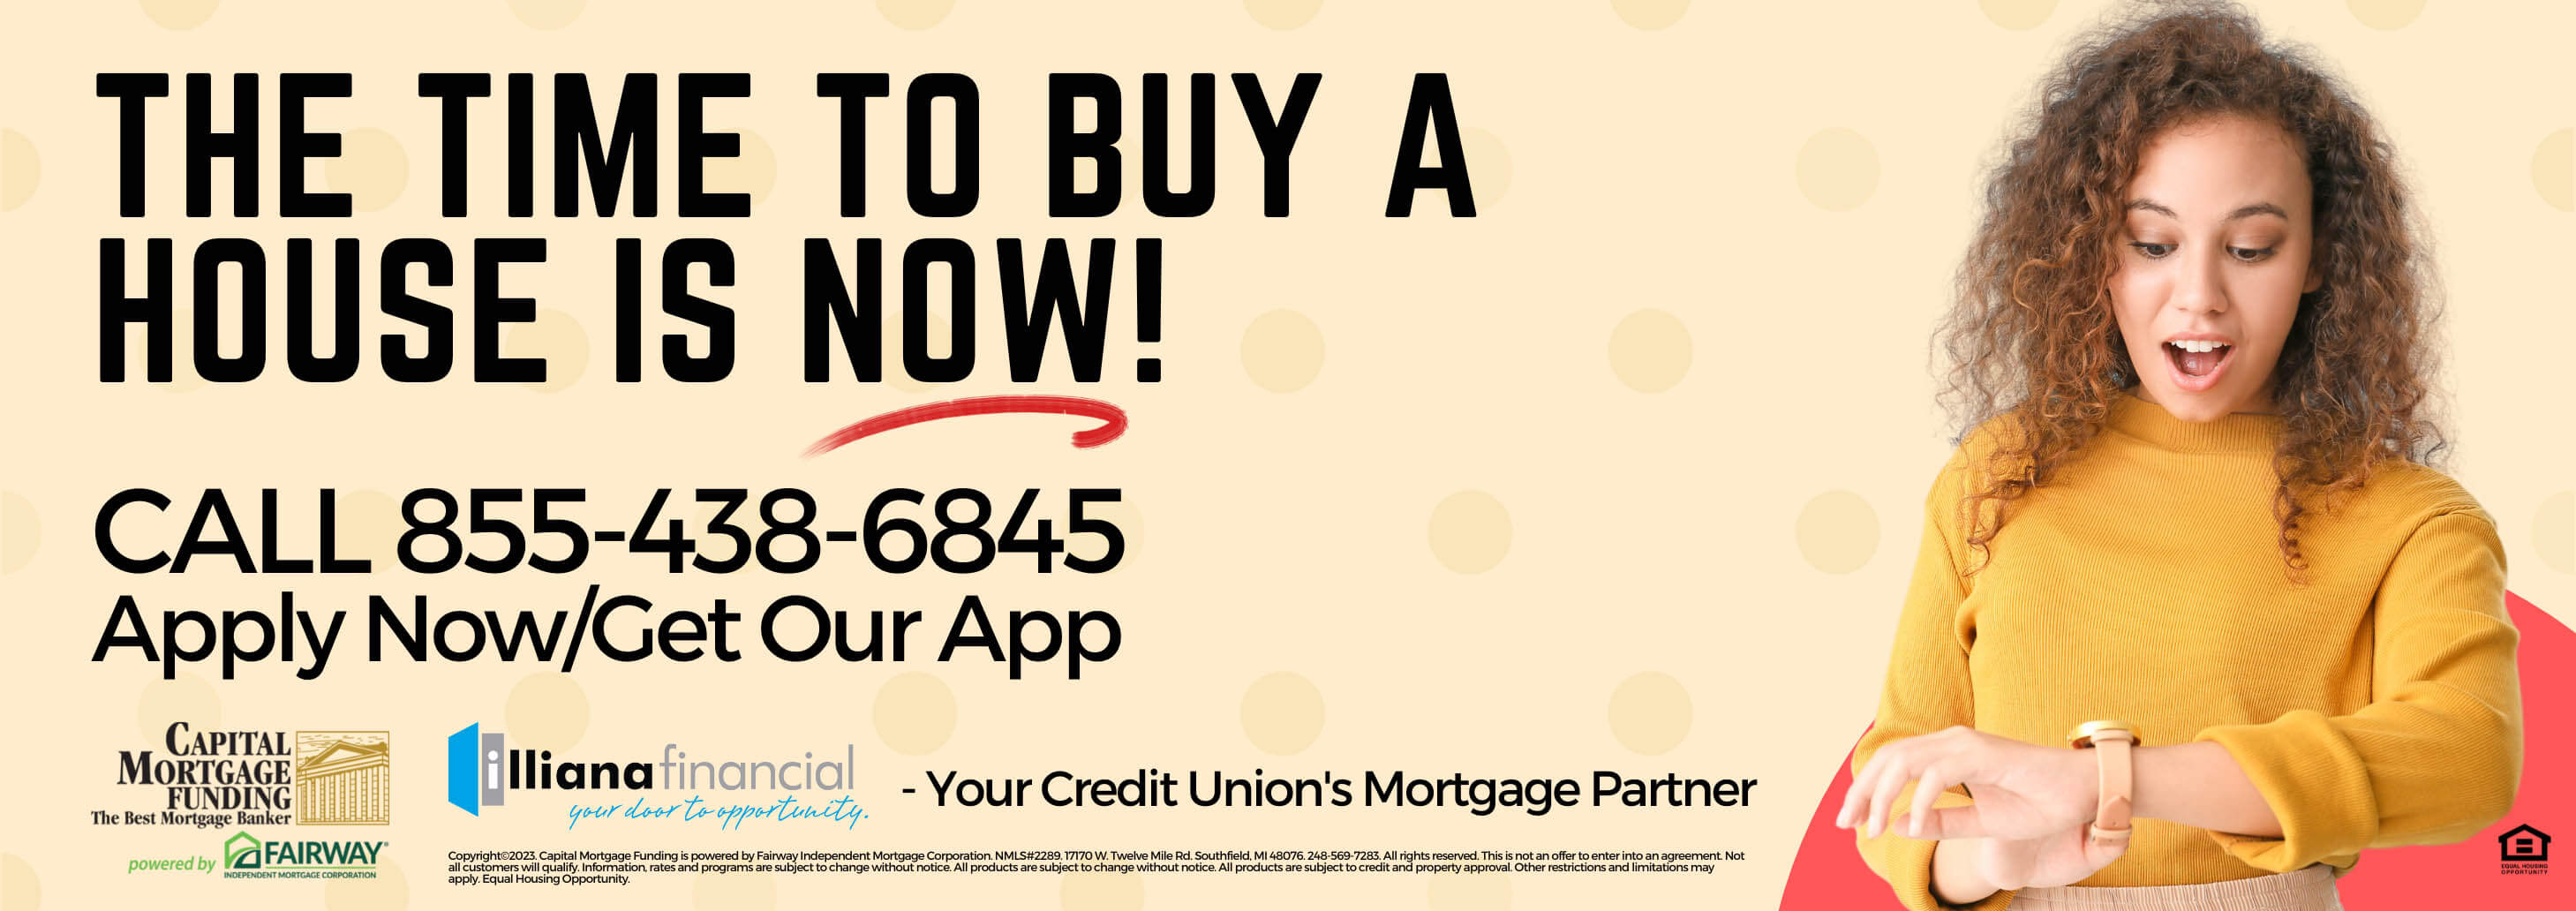 The time to buy a house is now! Call 855-438-6845 apply now/get our app Capital Mortgage Funding Illiana Financial Your credit union's mortgage partner. Copywright 2023 Capital Mortgage Funding powered by Fairway Independent Mortgage corporation. NMLS#2289. 17170 W. Twelve Mile Rd. Southfield, MI 48076. 248-569-7283. All rights reserved. This is not an offer to enter into an agreement. Not all customers will qualify. Information, rates and programs are subject to change without notce. All products are subject to change without notice. All products are subject to credit and property approval. Other restrictions and limitations may apply. Equal Housing Opportunity.